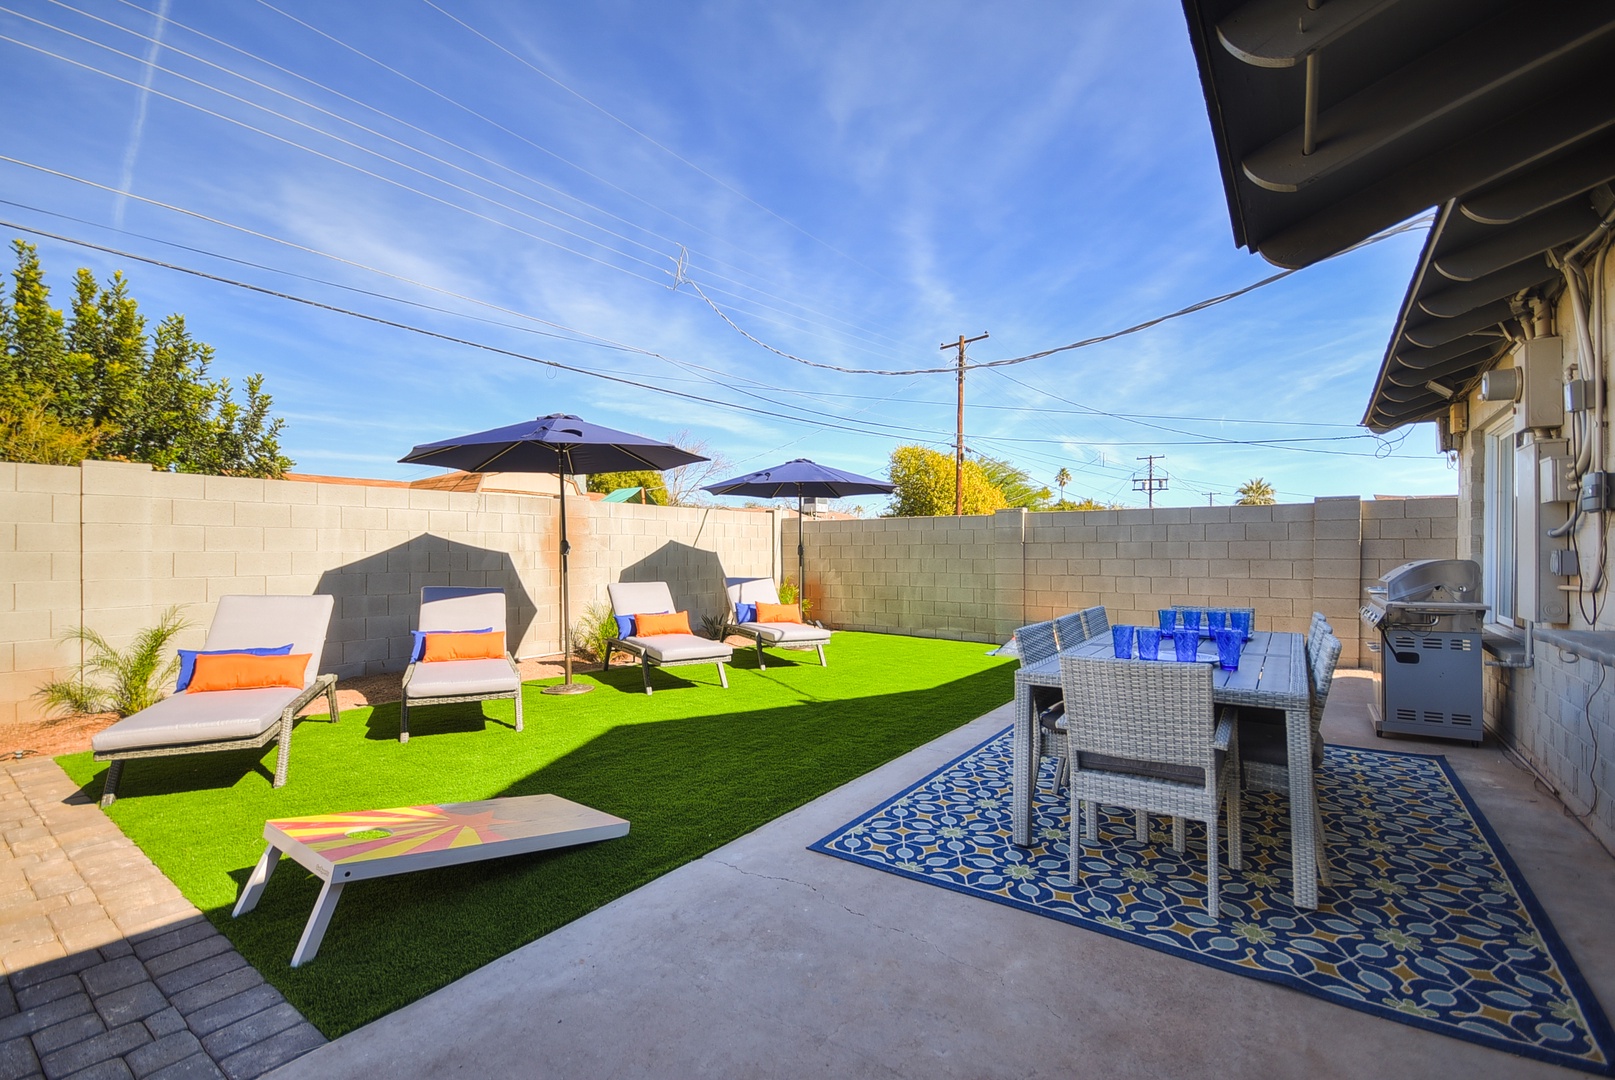 Patio and lounge area with backyard games